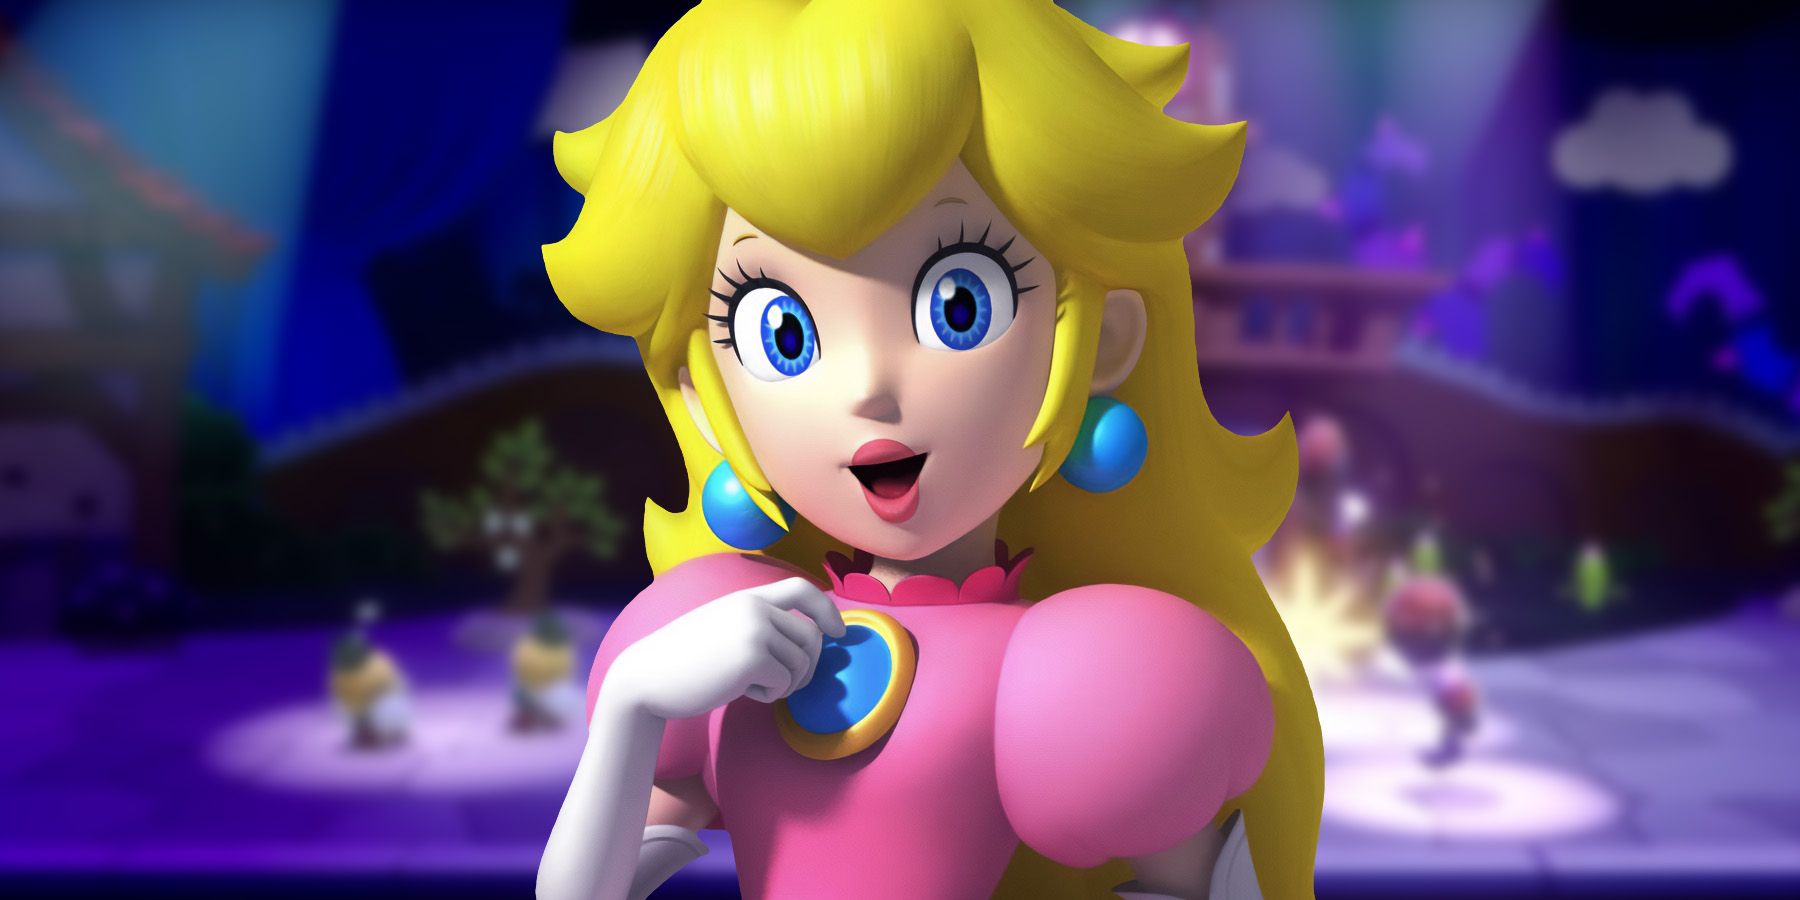 theory-may-explain-plot-of-mysterious-princess-peach-video-game